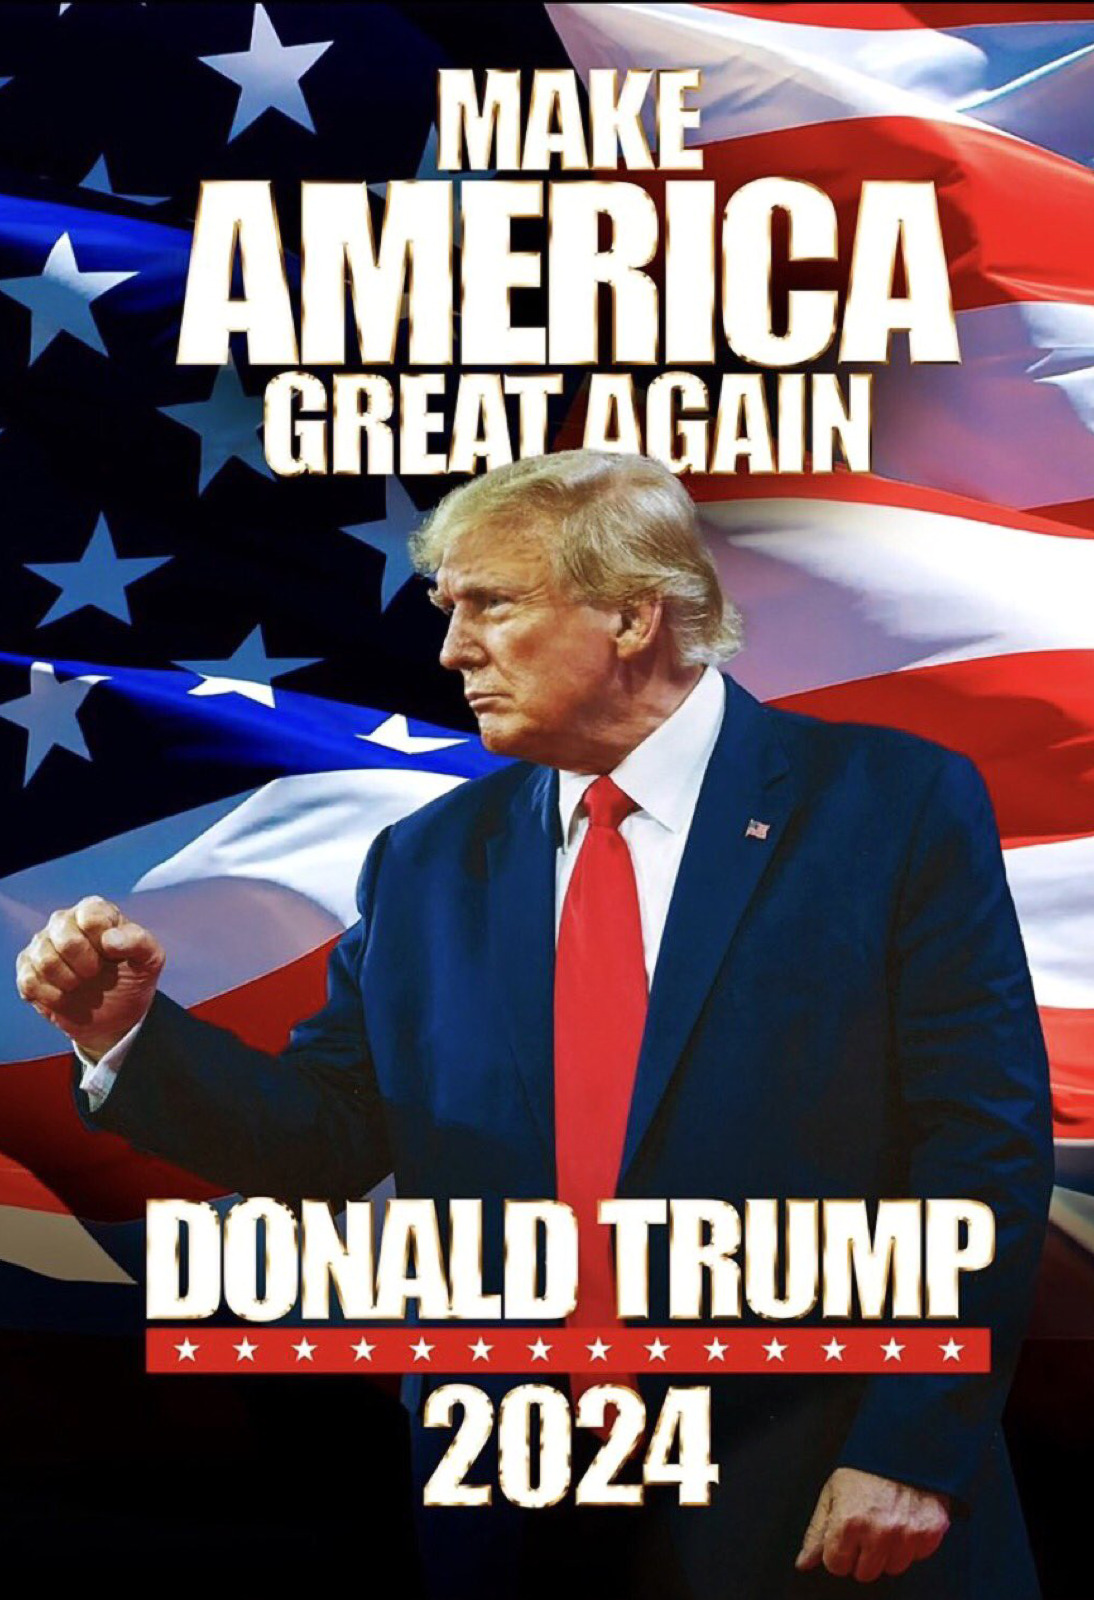 Trump 2024 Poster Display Your Support with Pride!